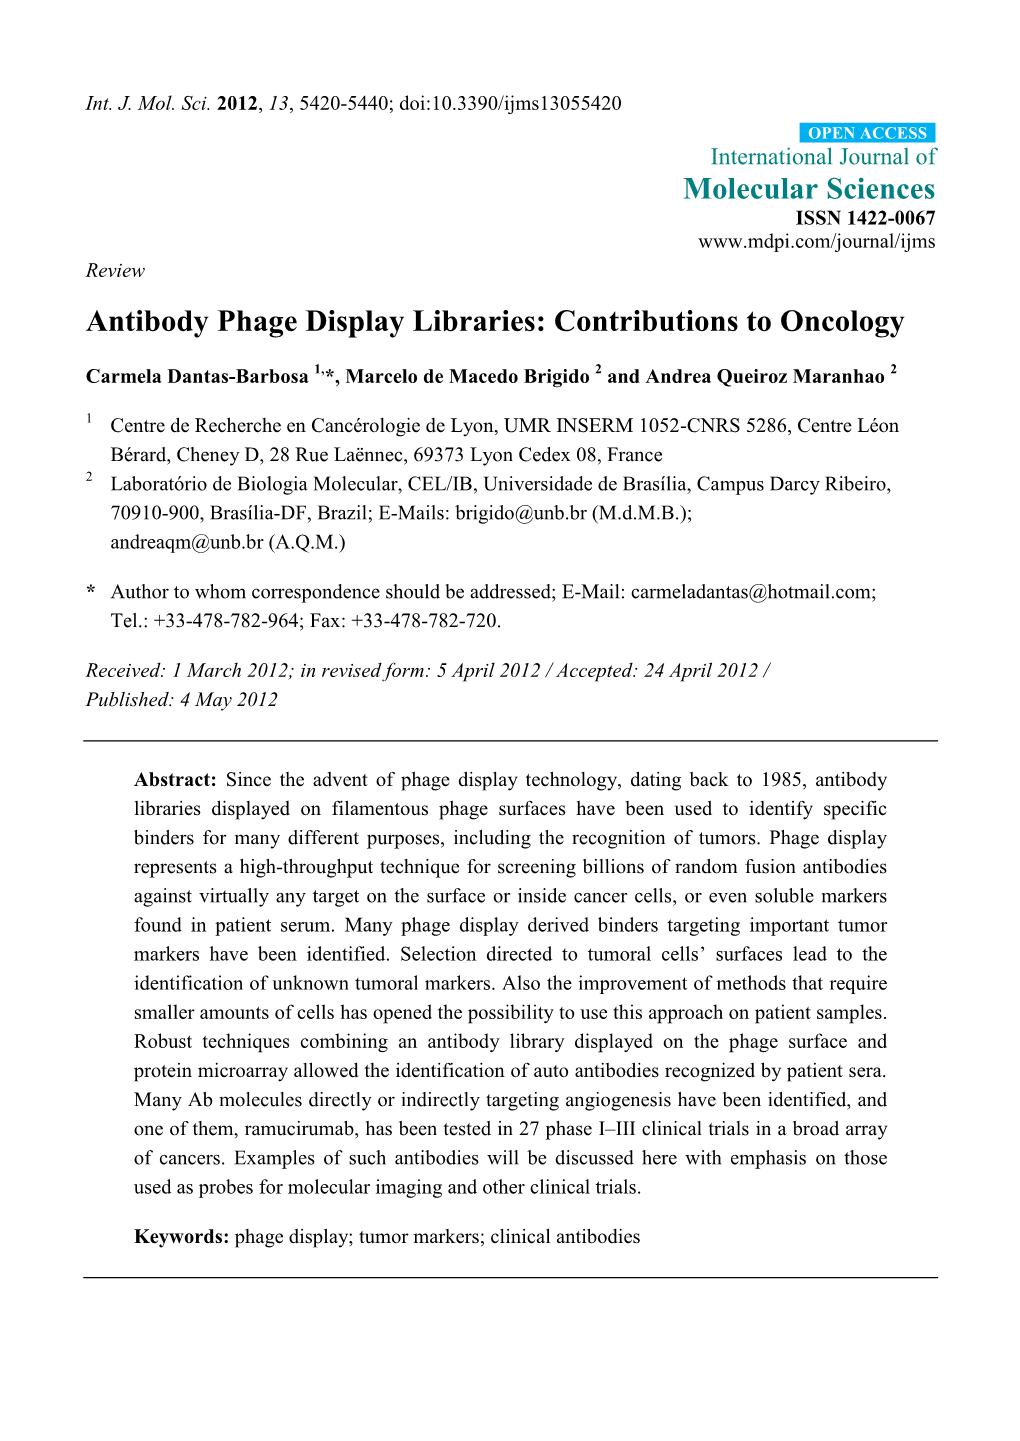 Antibody Phage Display Libraries: Contributions to Oncology